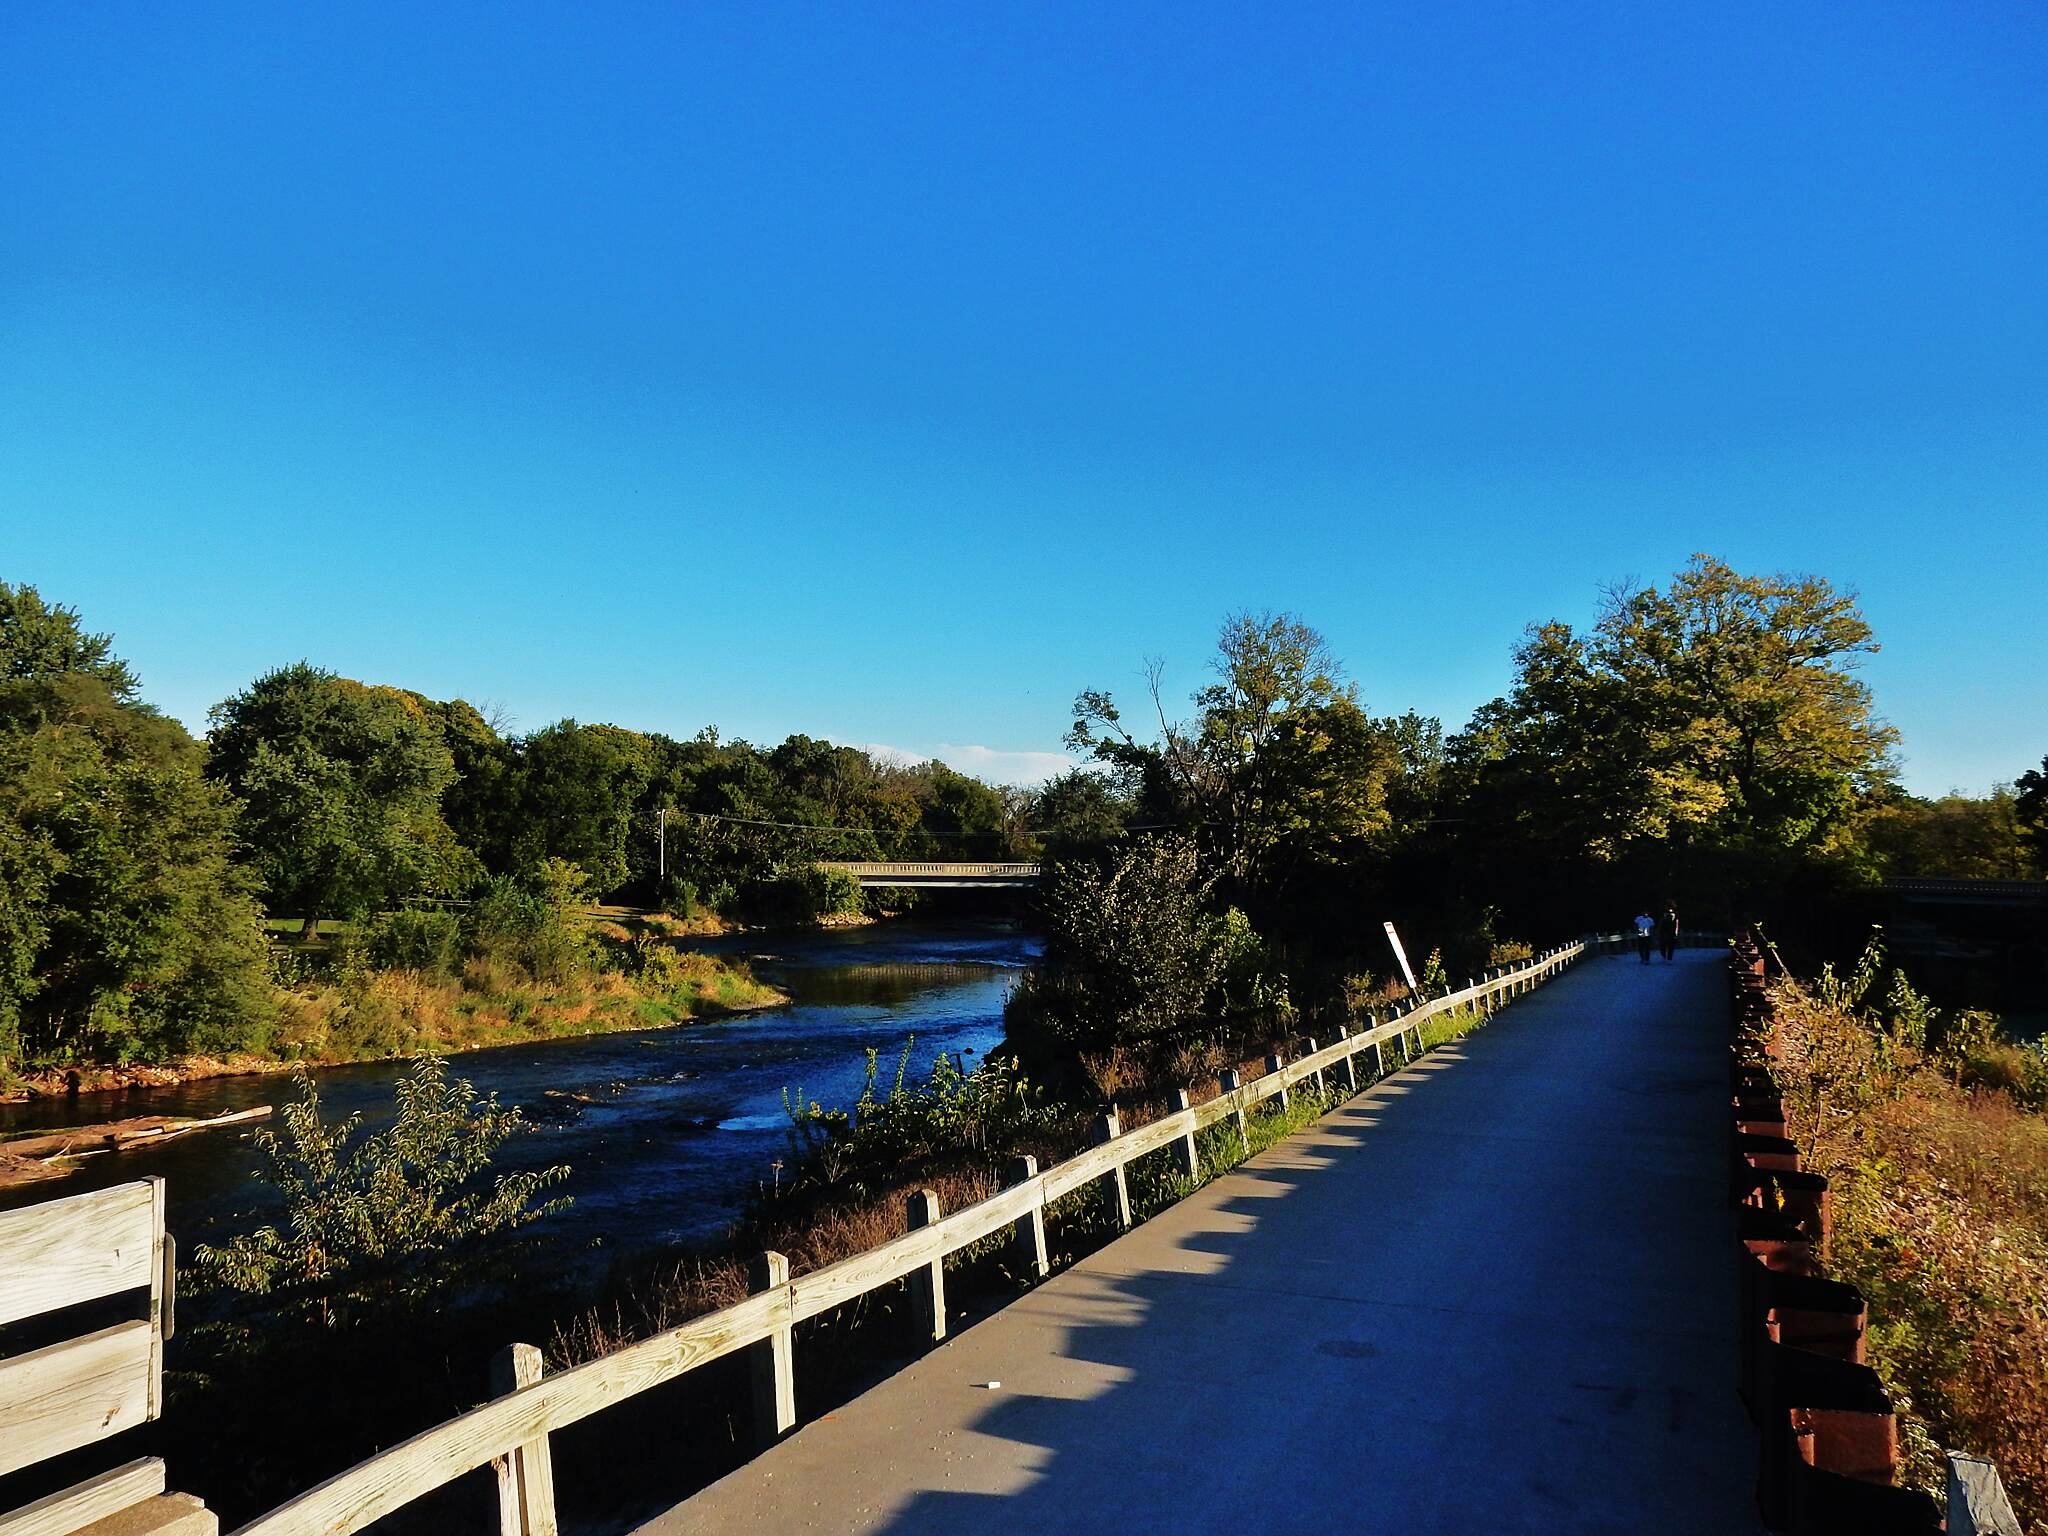 Illinois & Michigan Canal State Trail | Photo by TrailLink user tommyspan